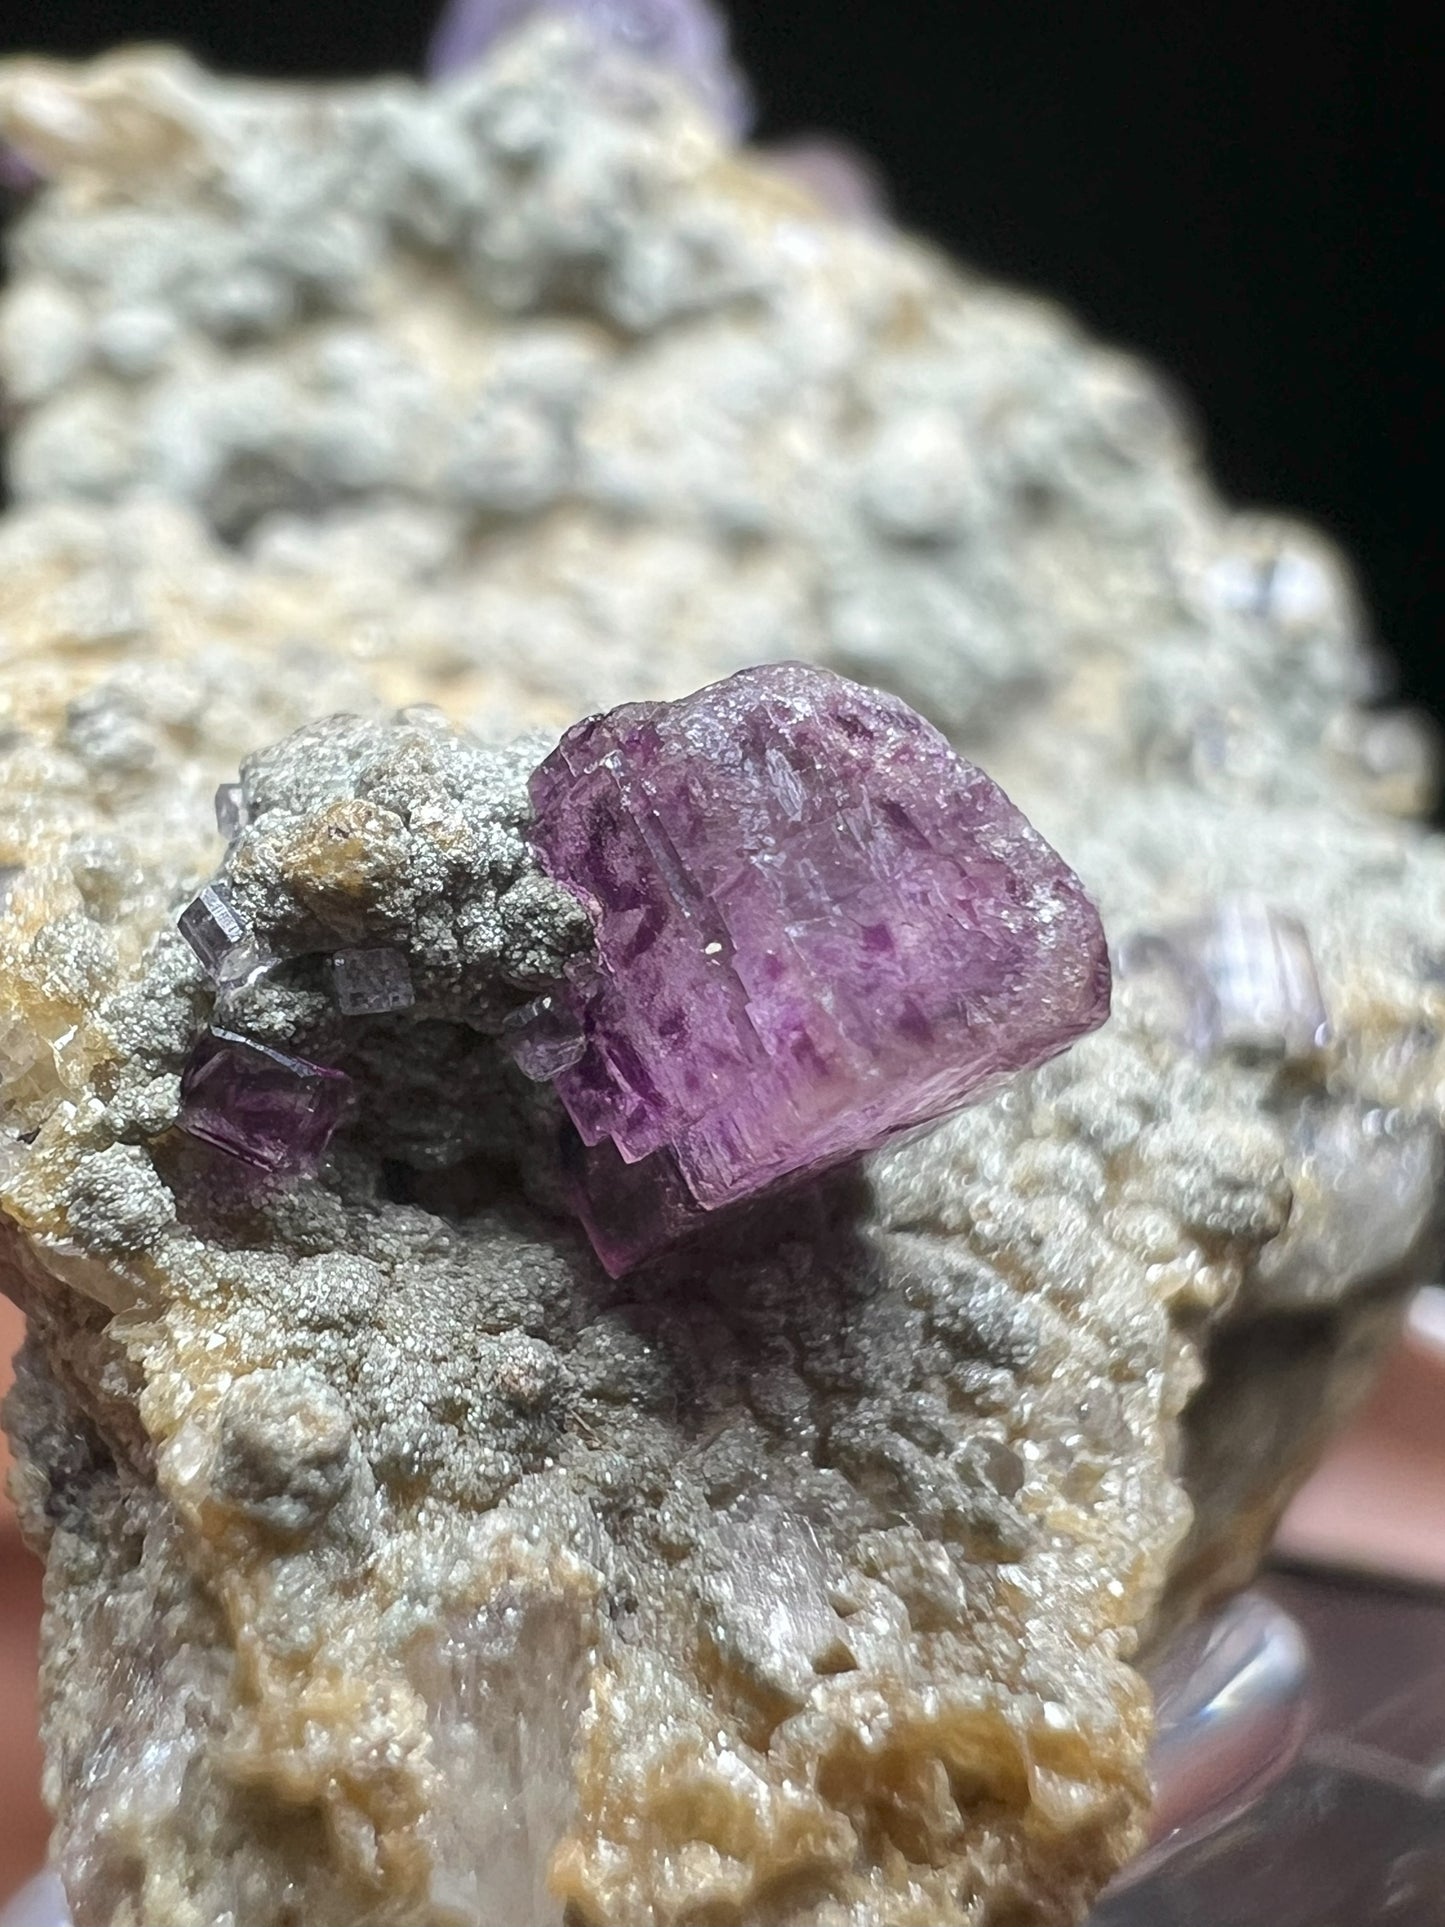 Rare Museum Quality Fluorapatite And Fluorite On Matrix From Saxony, Germany- Home Décor, Collectors Piece